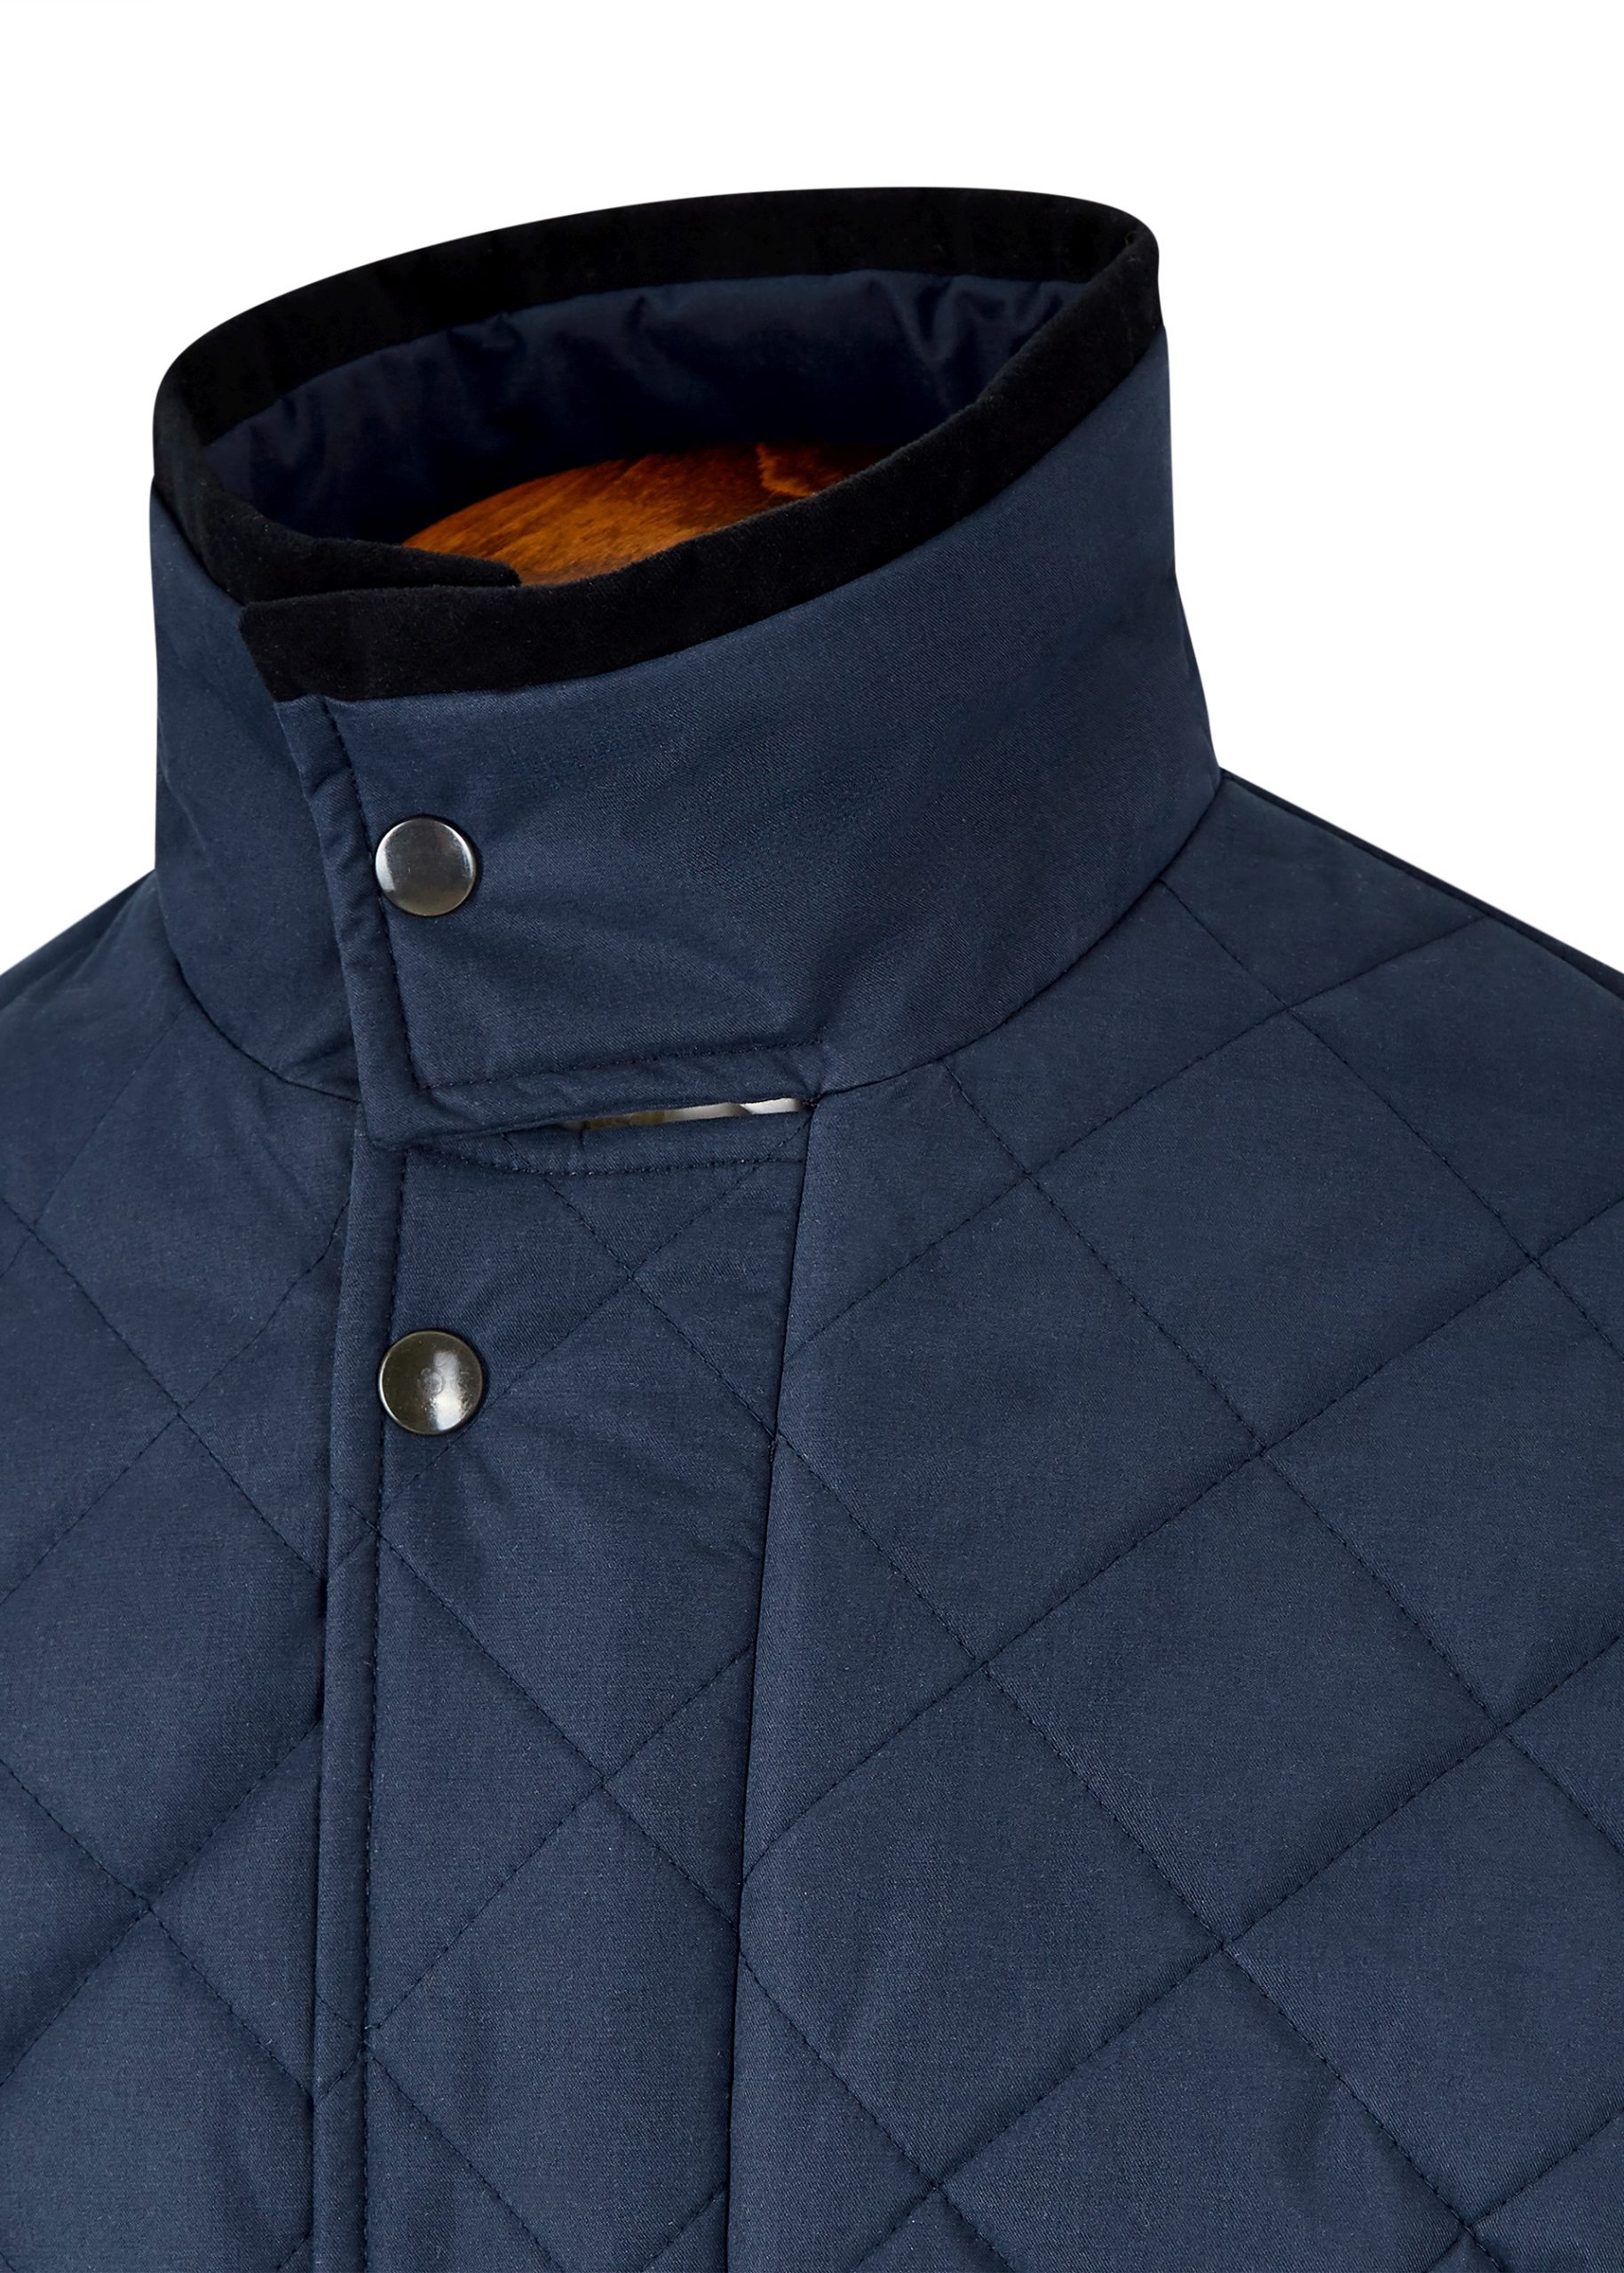 Roderick Charles navy outerwear